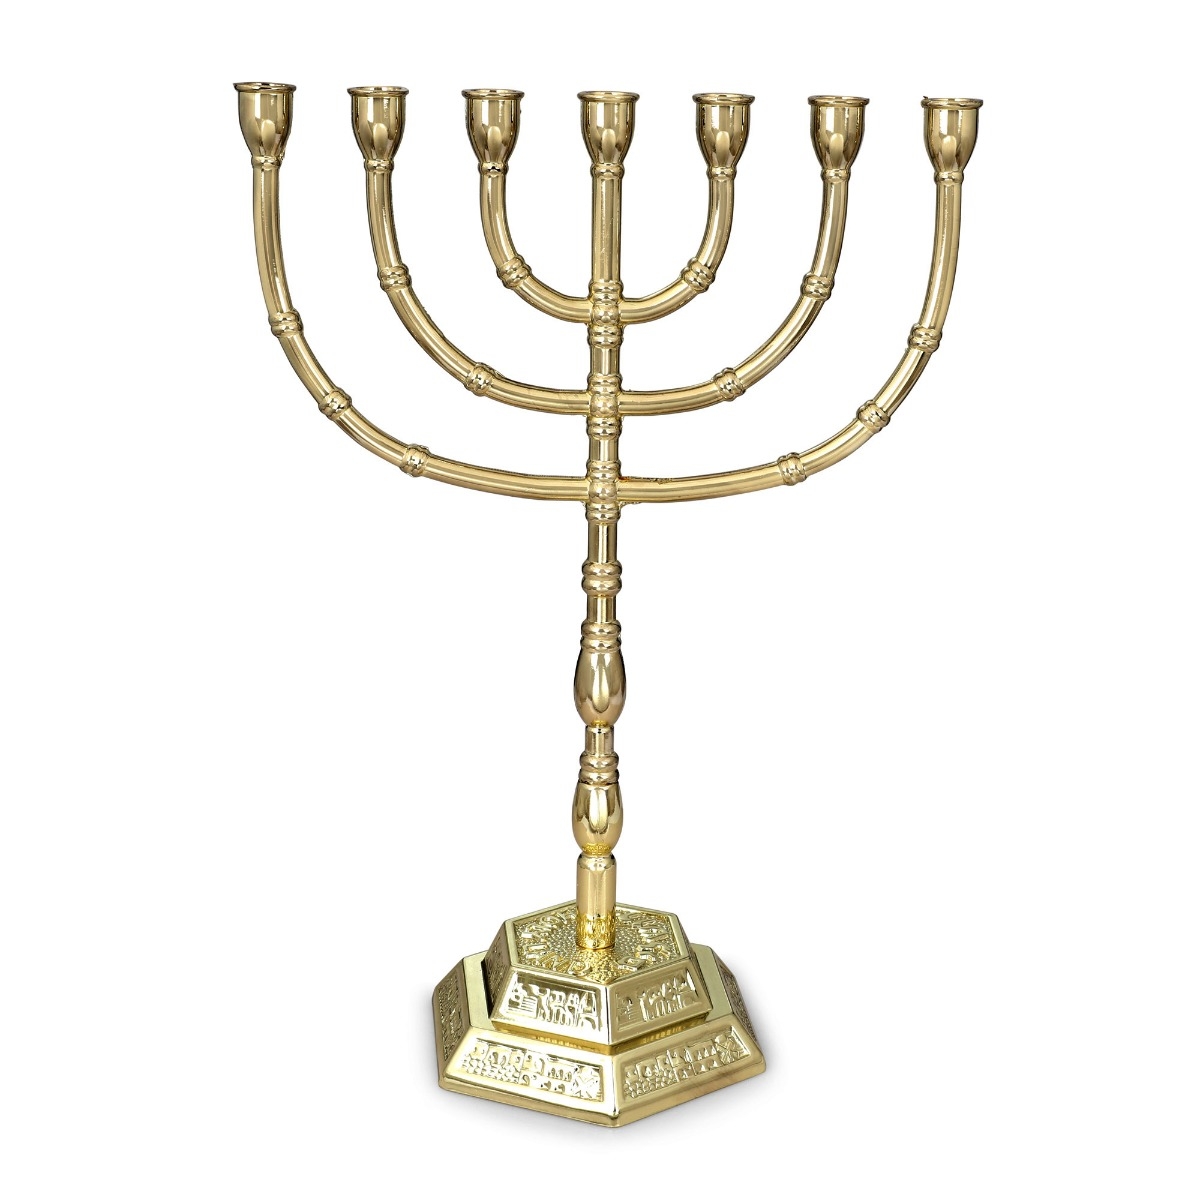 Traditional Ornate 7-Branched Menorah (Variety of Colors) - 1